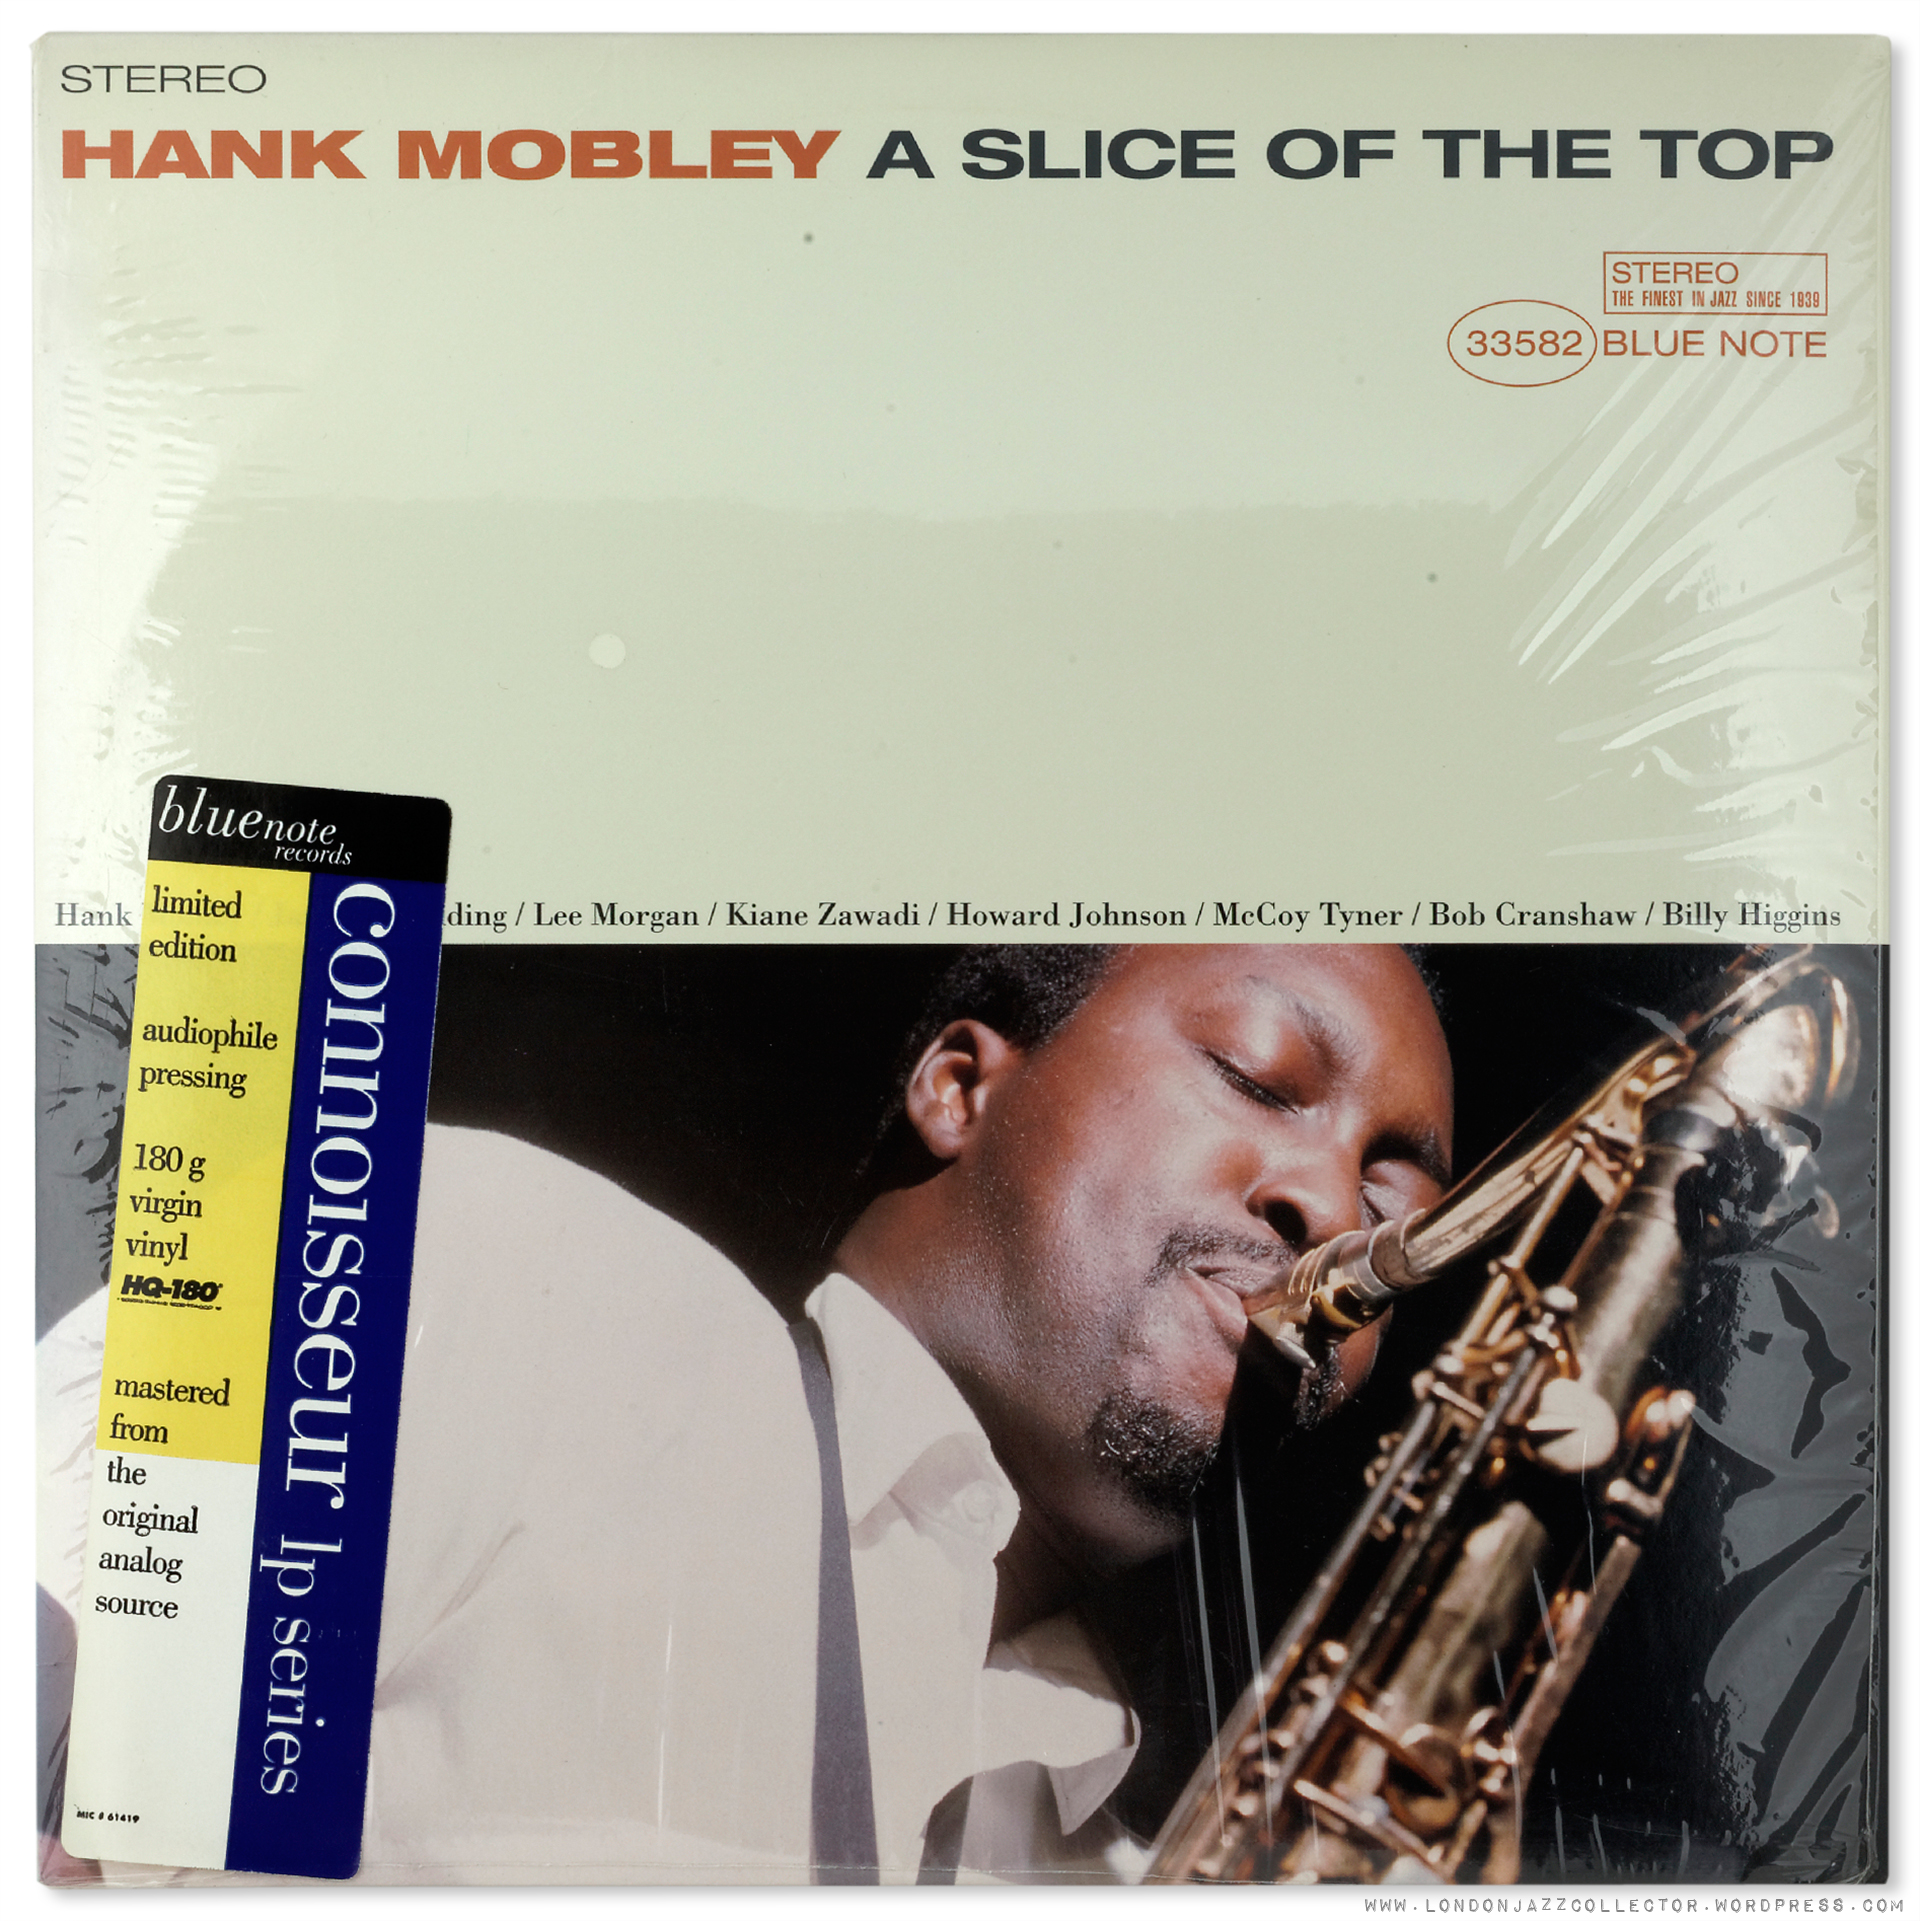 Hank A Slice Of The Top (1966) Note Connoisseur | LondonJazzCollector